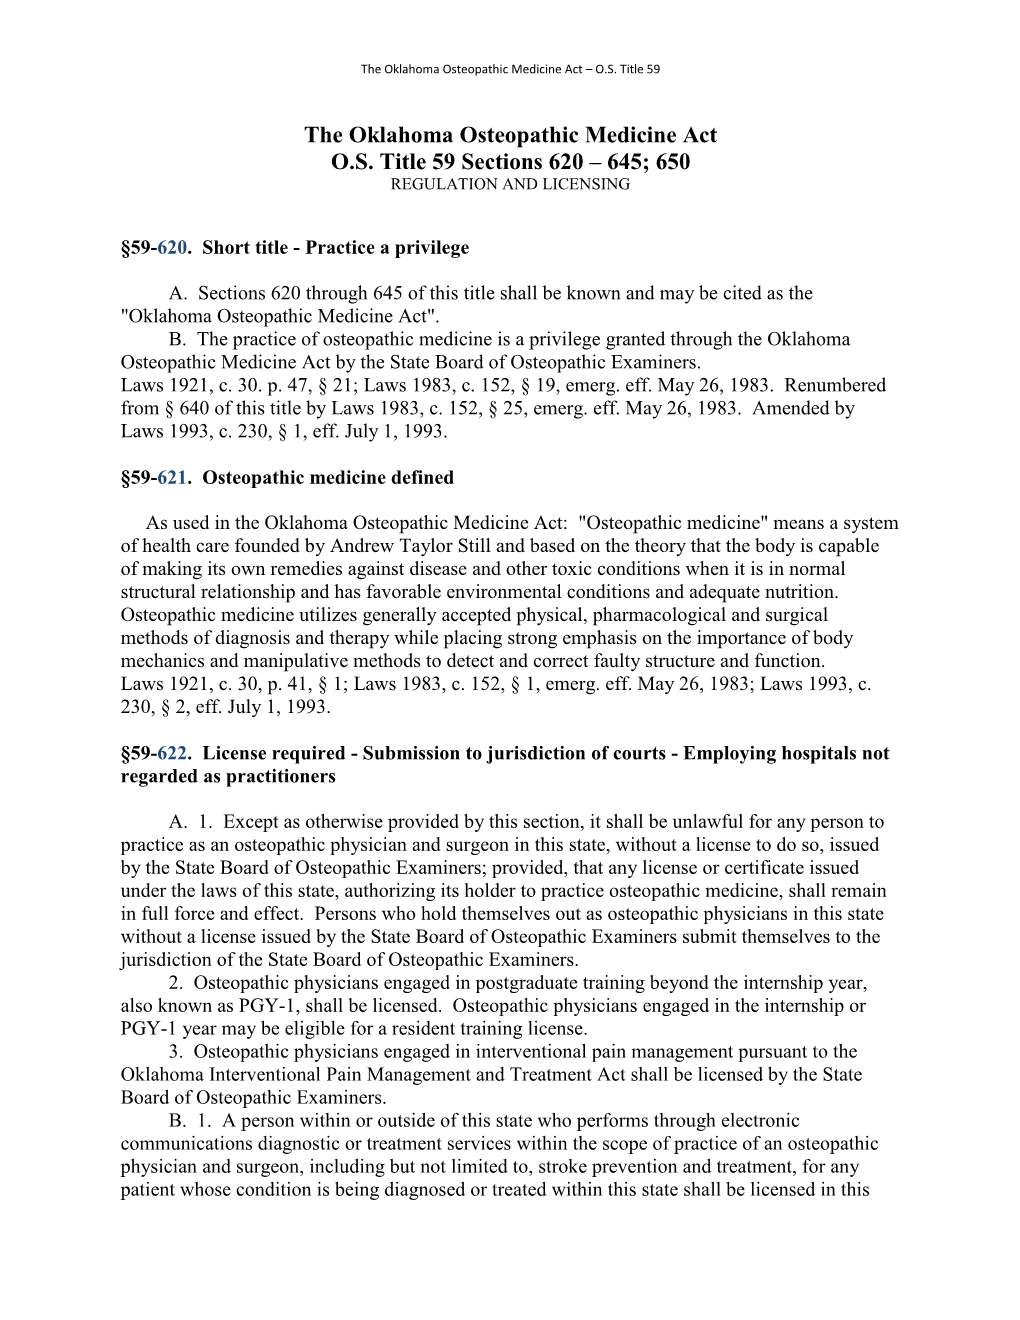 The Oklahoma Osteopathic Medicine Act OS Title 59